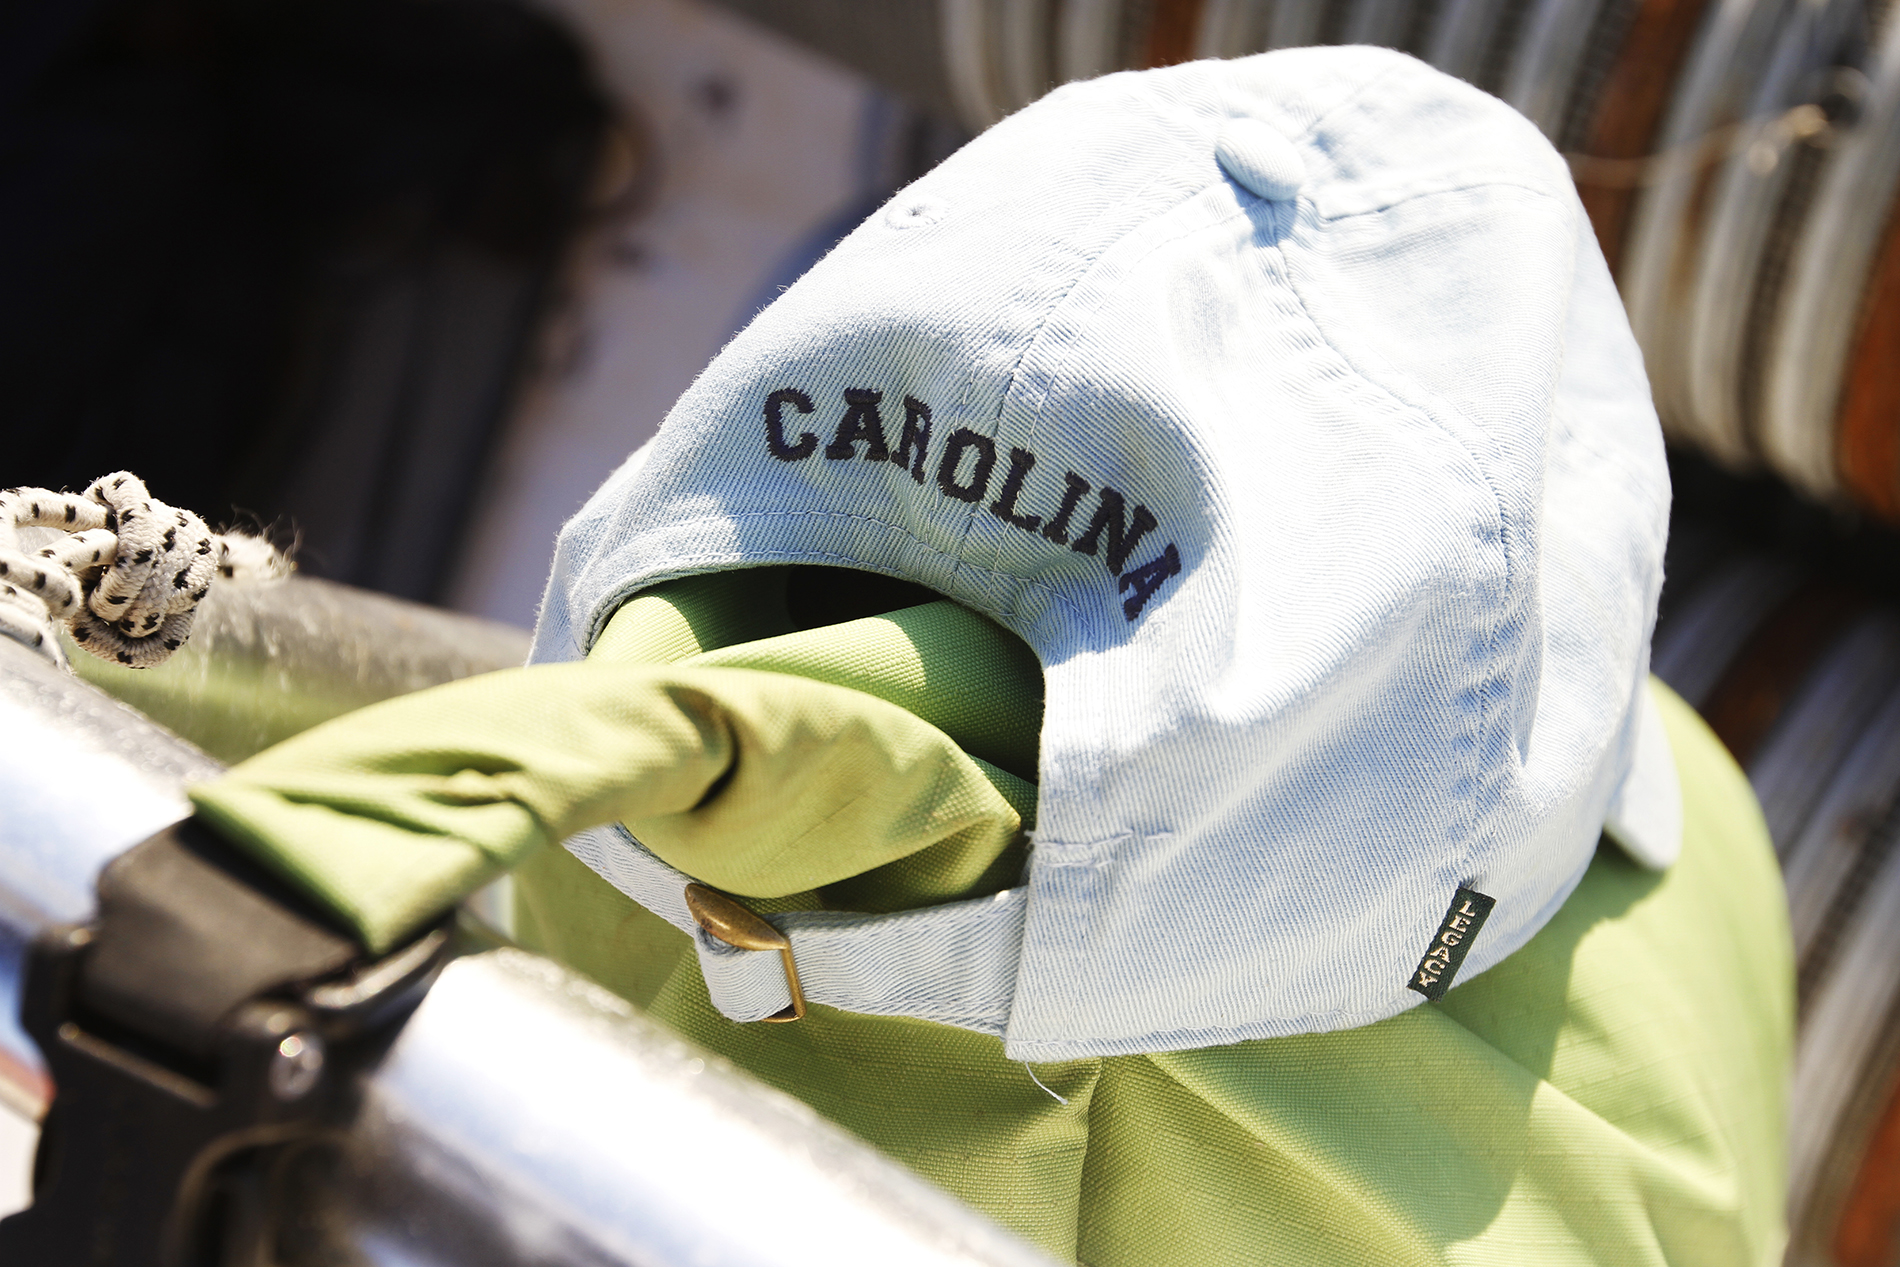 A Carolina baseball cap is shown with a bright green handle of a bookbag hooked through it. 